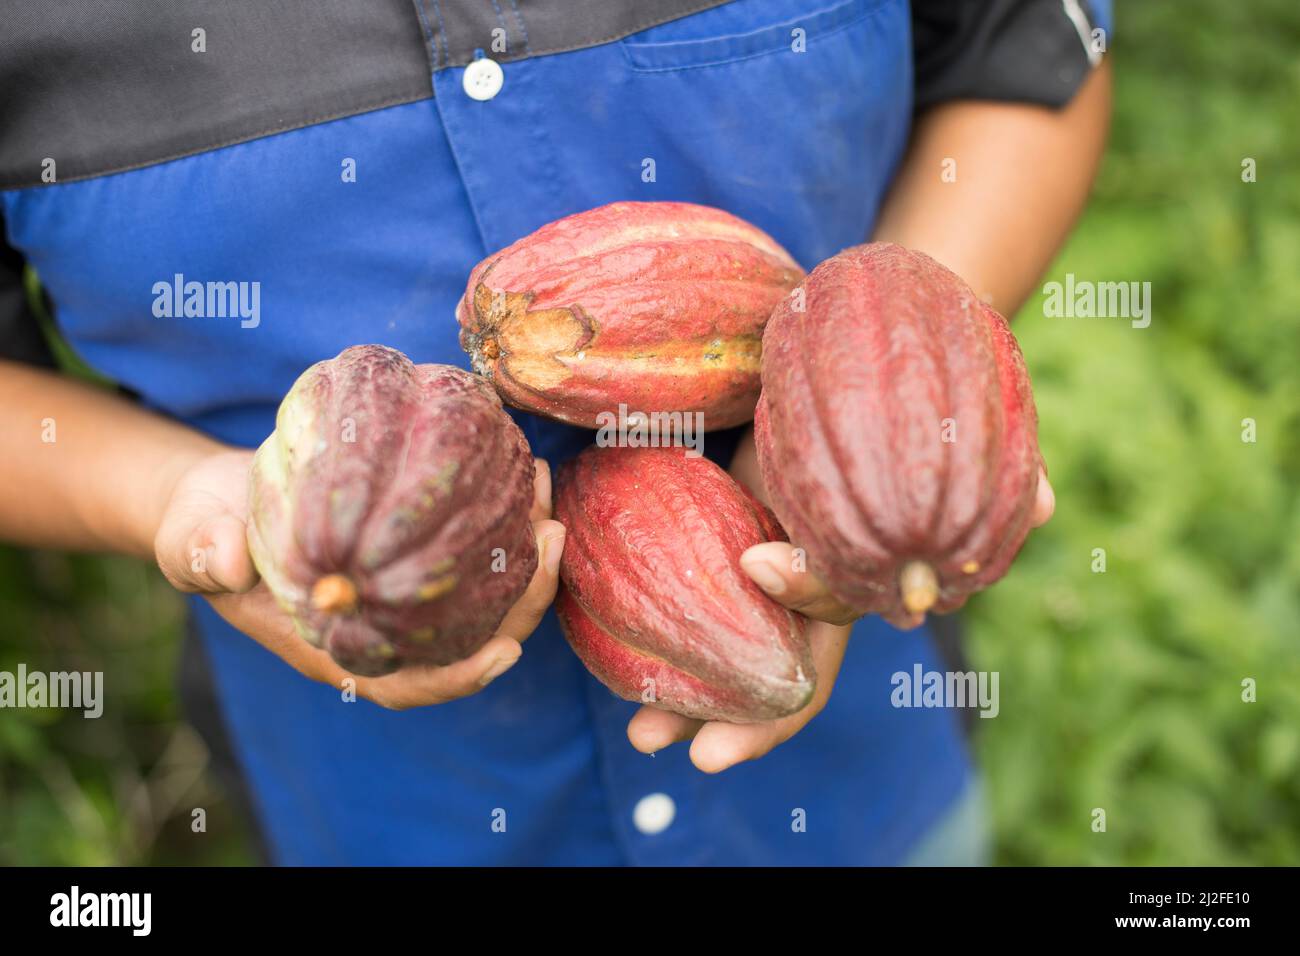 Saffarudin, holds freshly-harvested cocoa bean pods in a demonstration plot in Mamuju Regency, Indonesia. He is the Regional Manager and Agribusiness Stock Photo